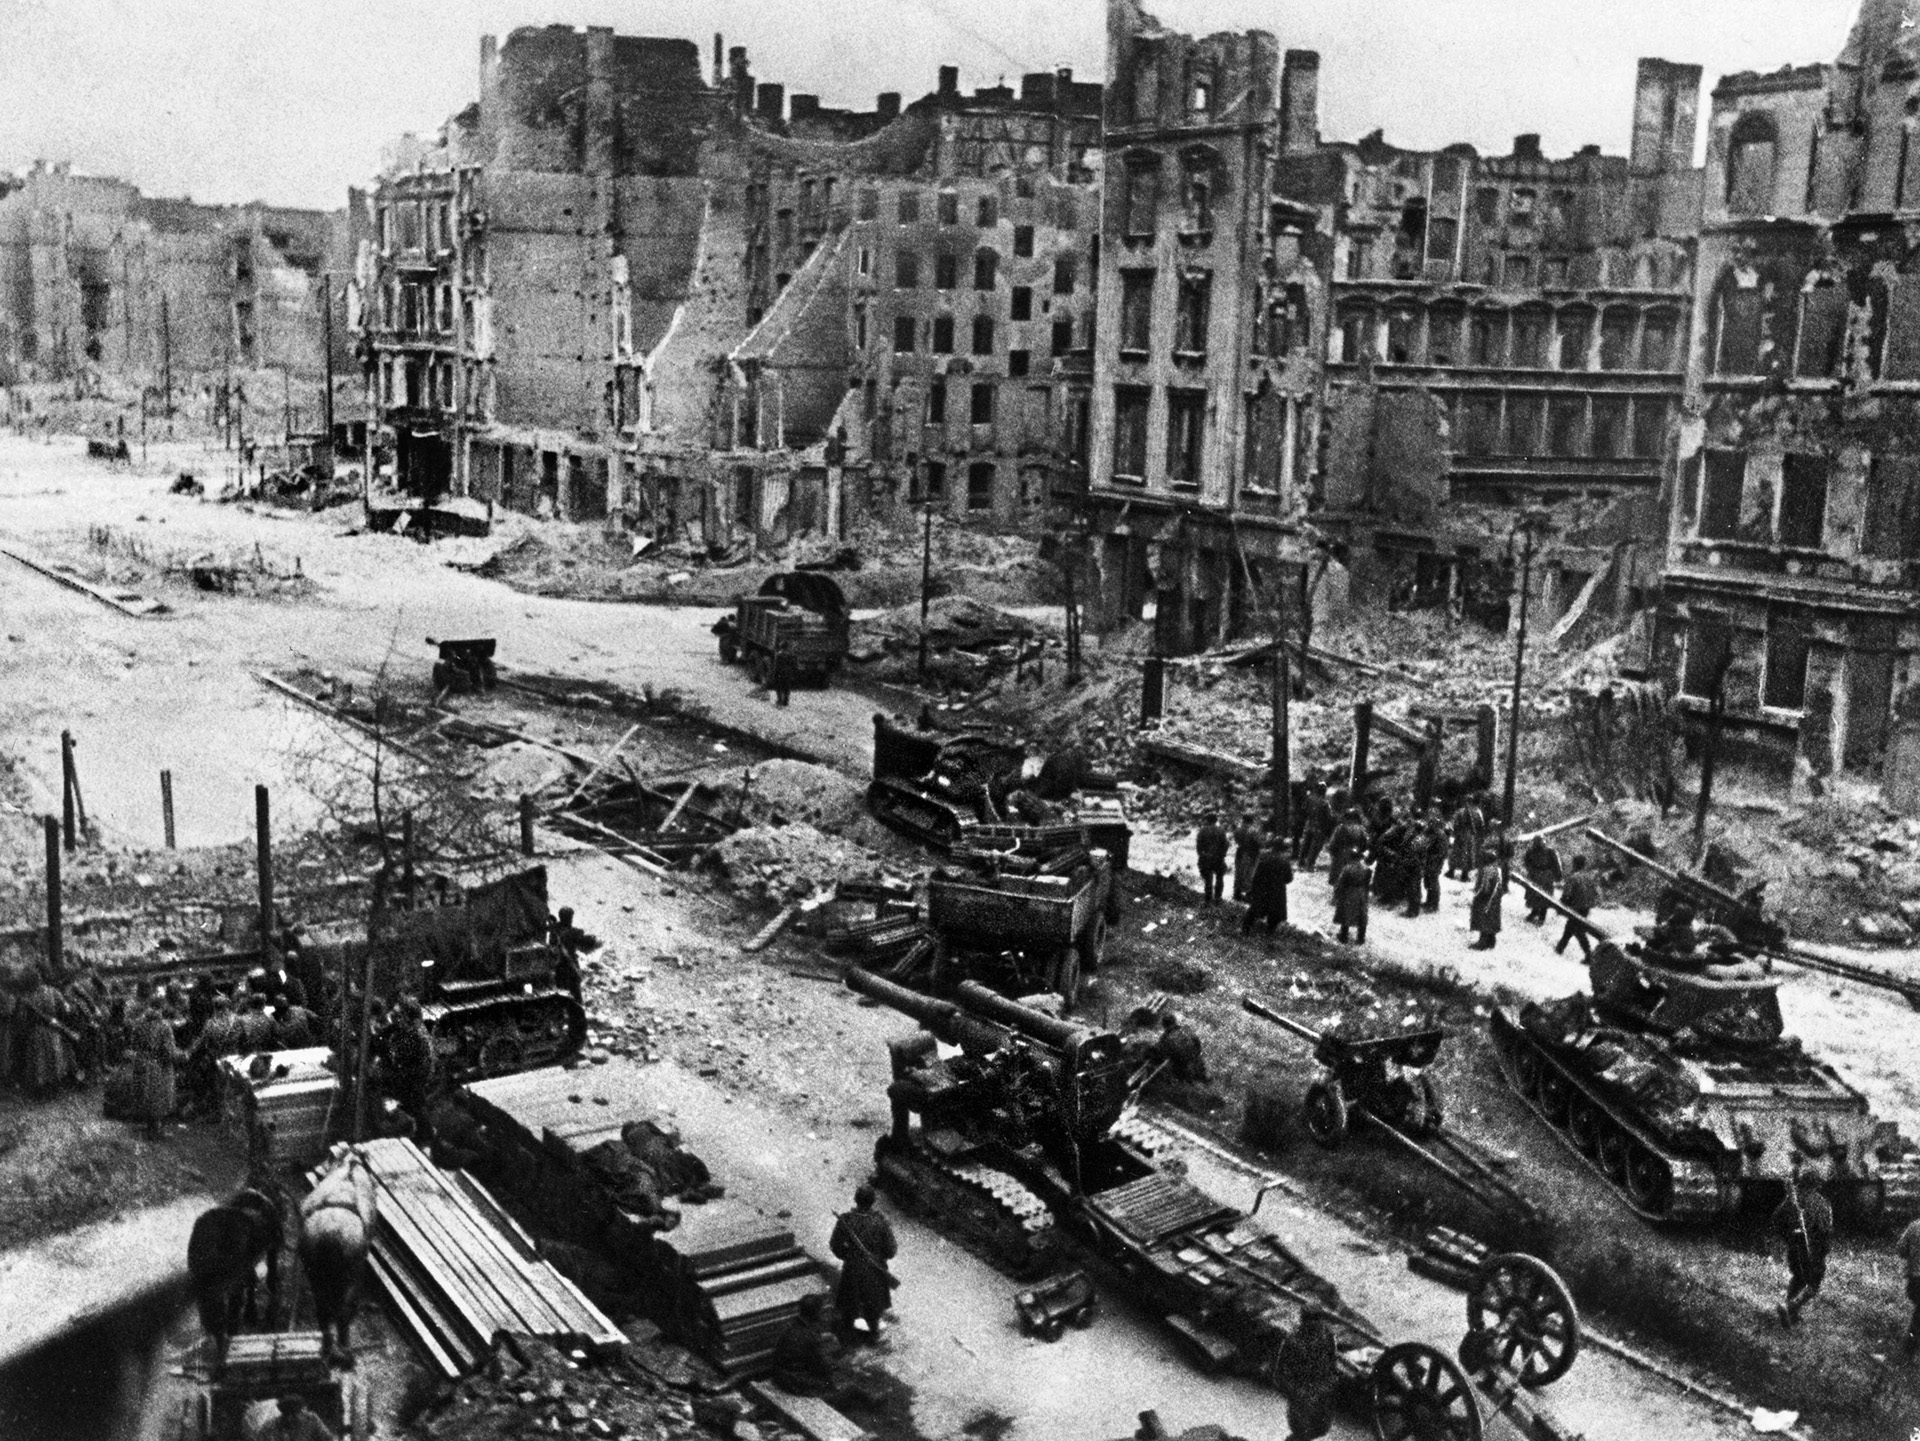 Soviet tanks and self-propelled artillery shown on Warschauer Strasse in the heart of Berlin after resistance had ended.